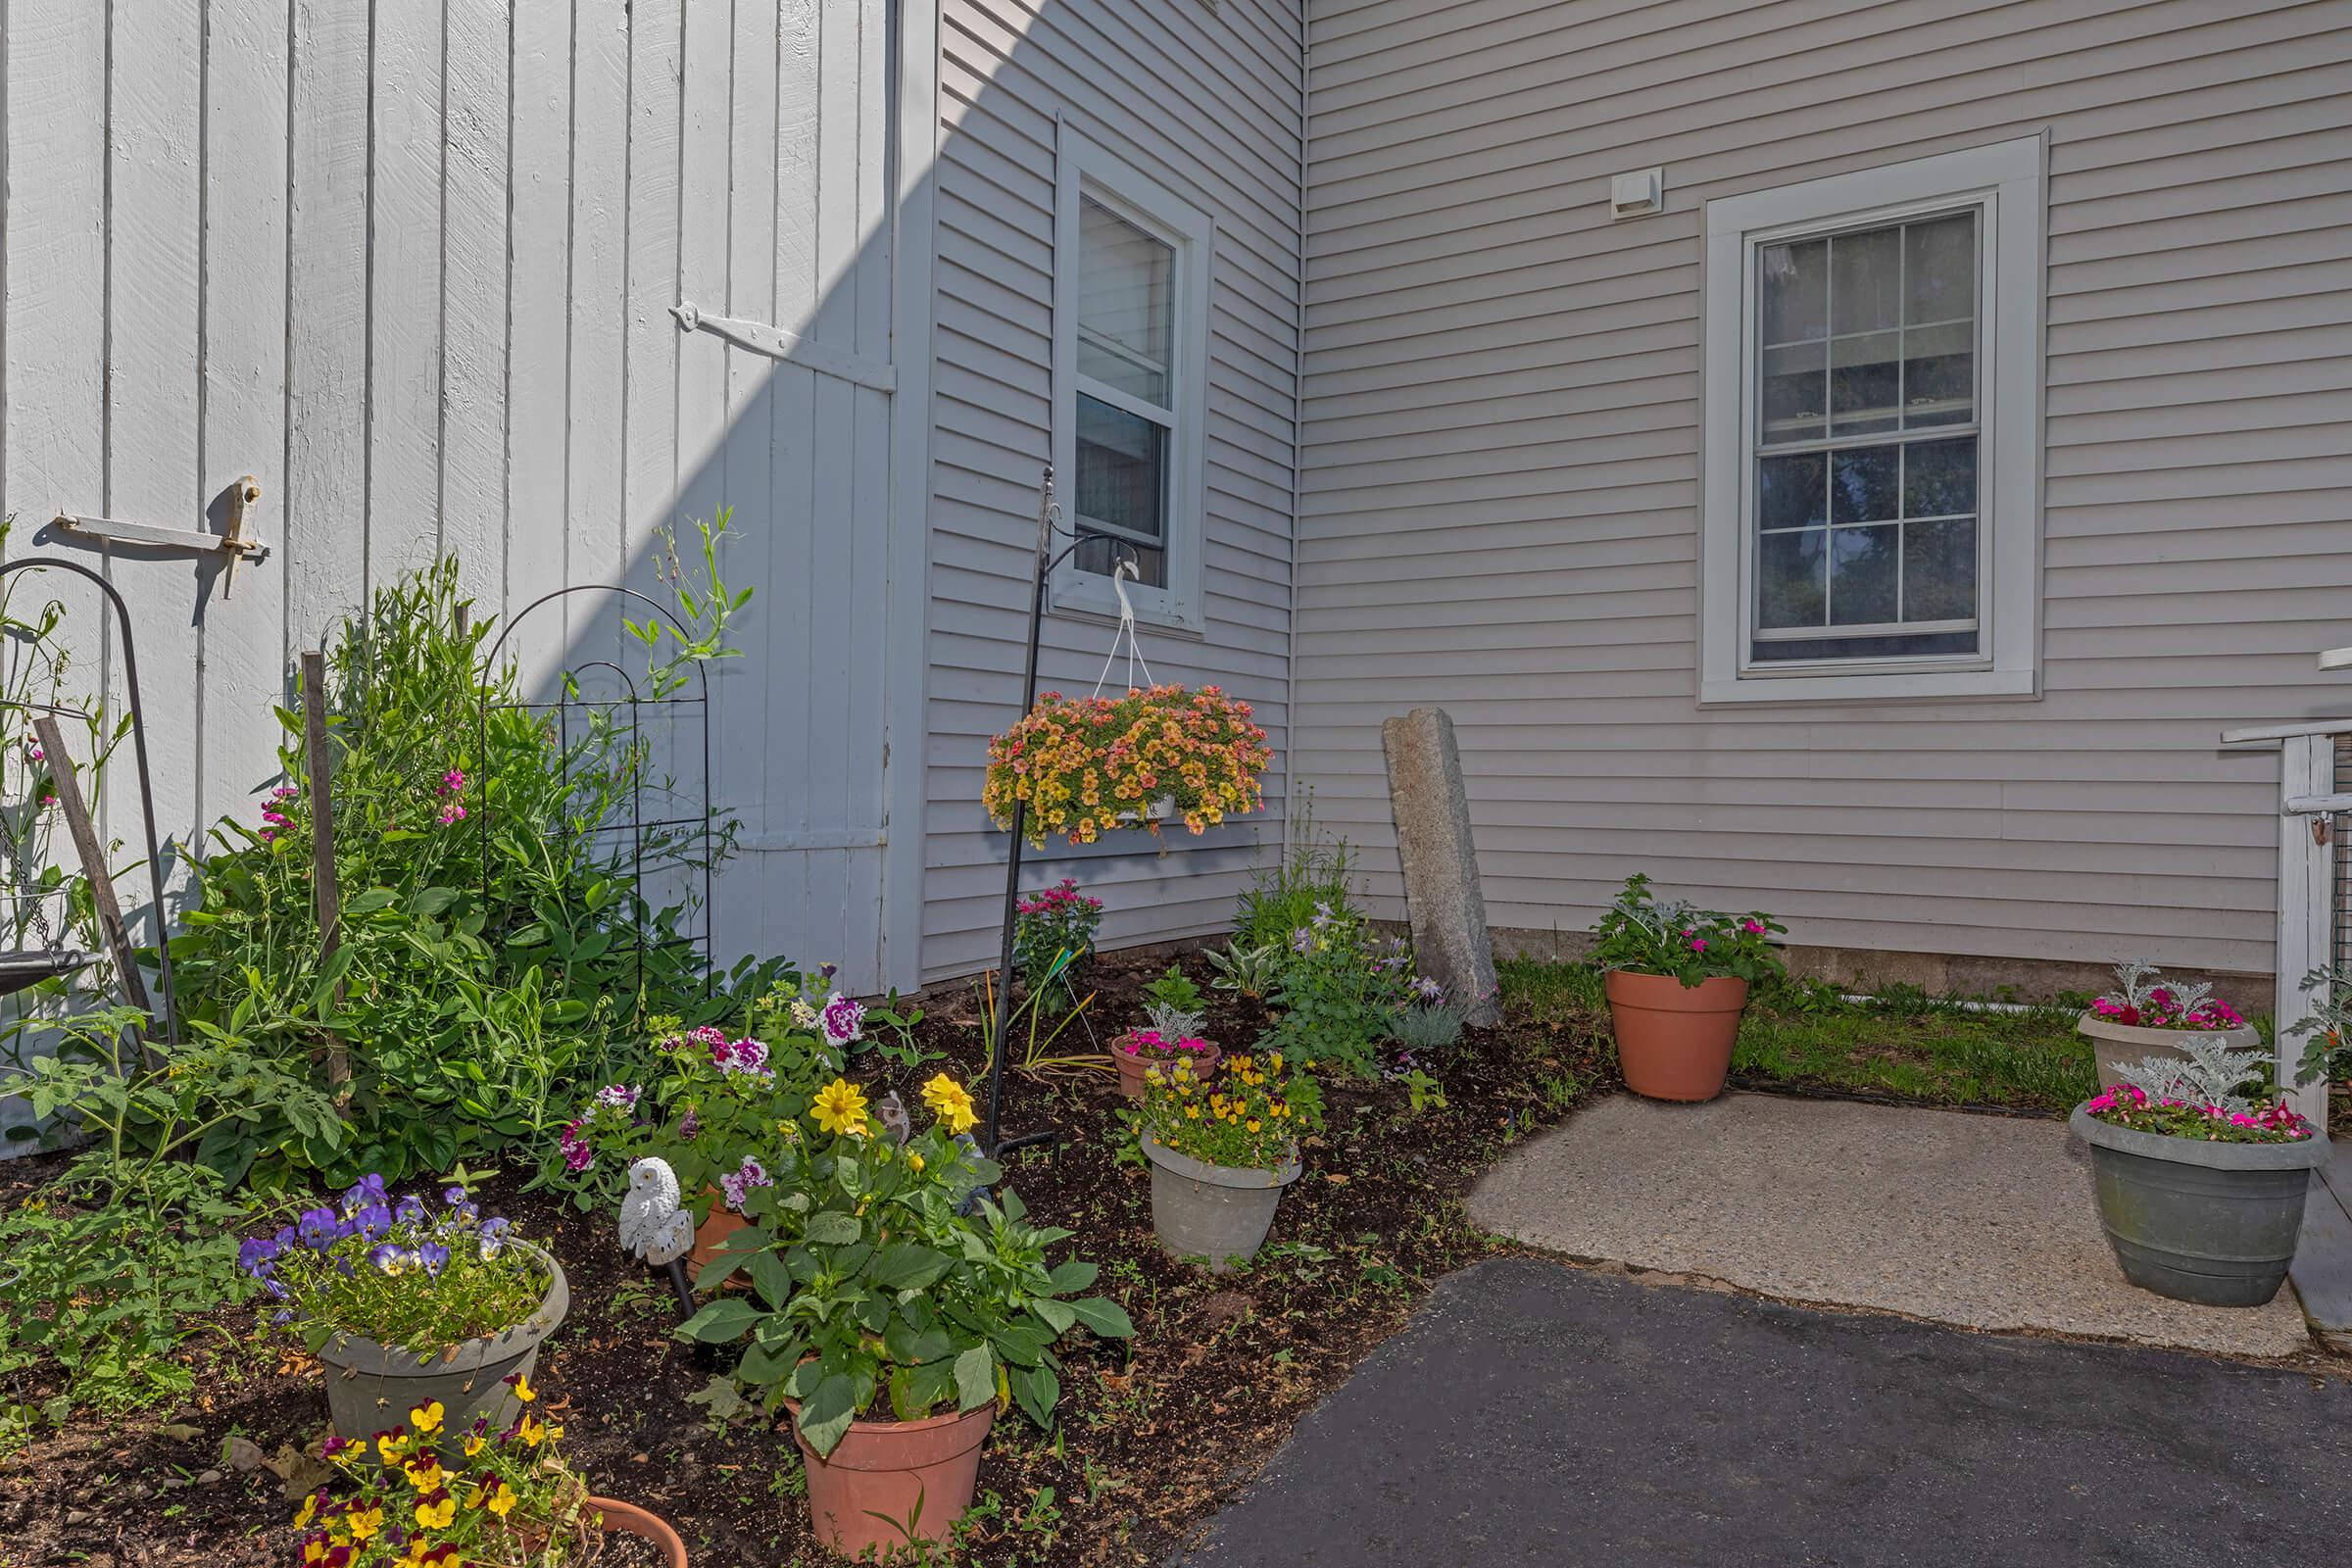 a close up of a flower garden in front of a house